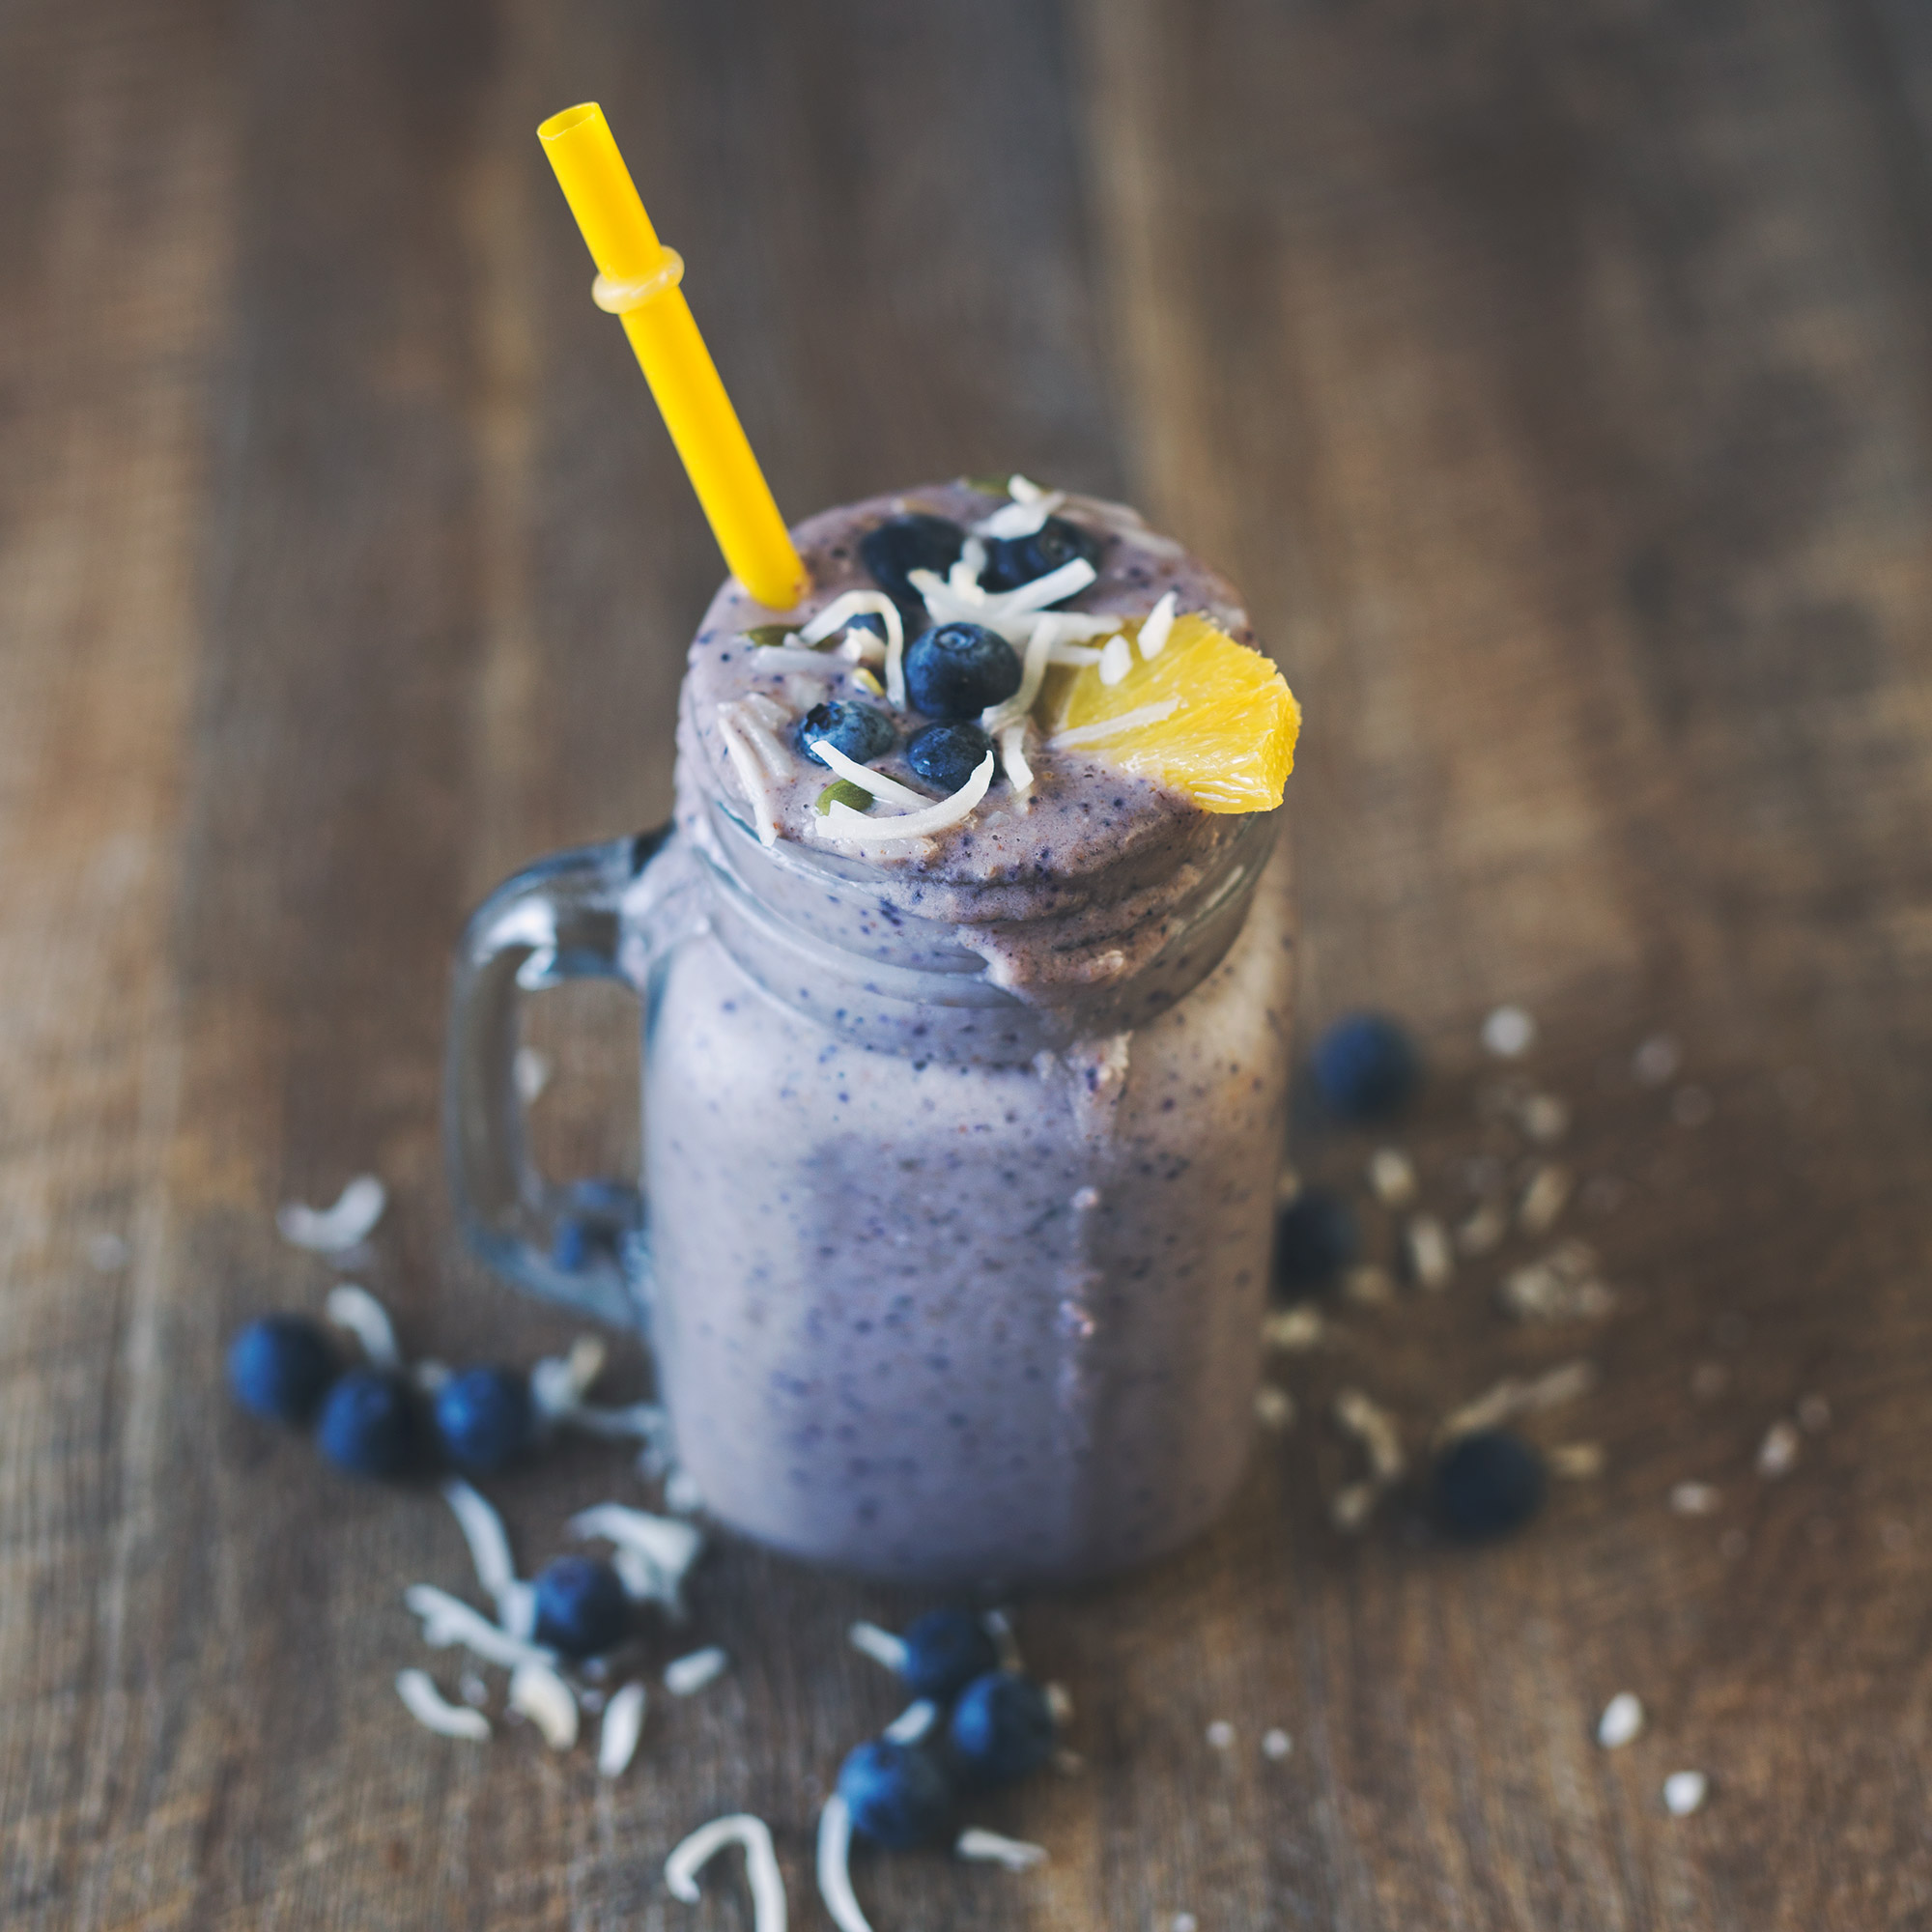 Blueberry and Banana Dairy Free Smoothie (2 ways)